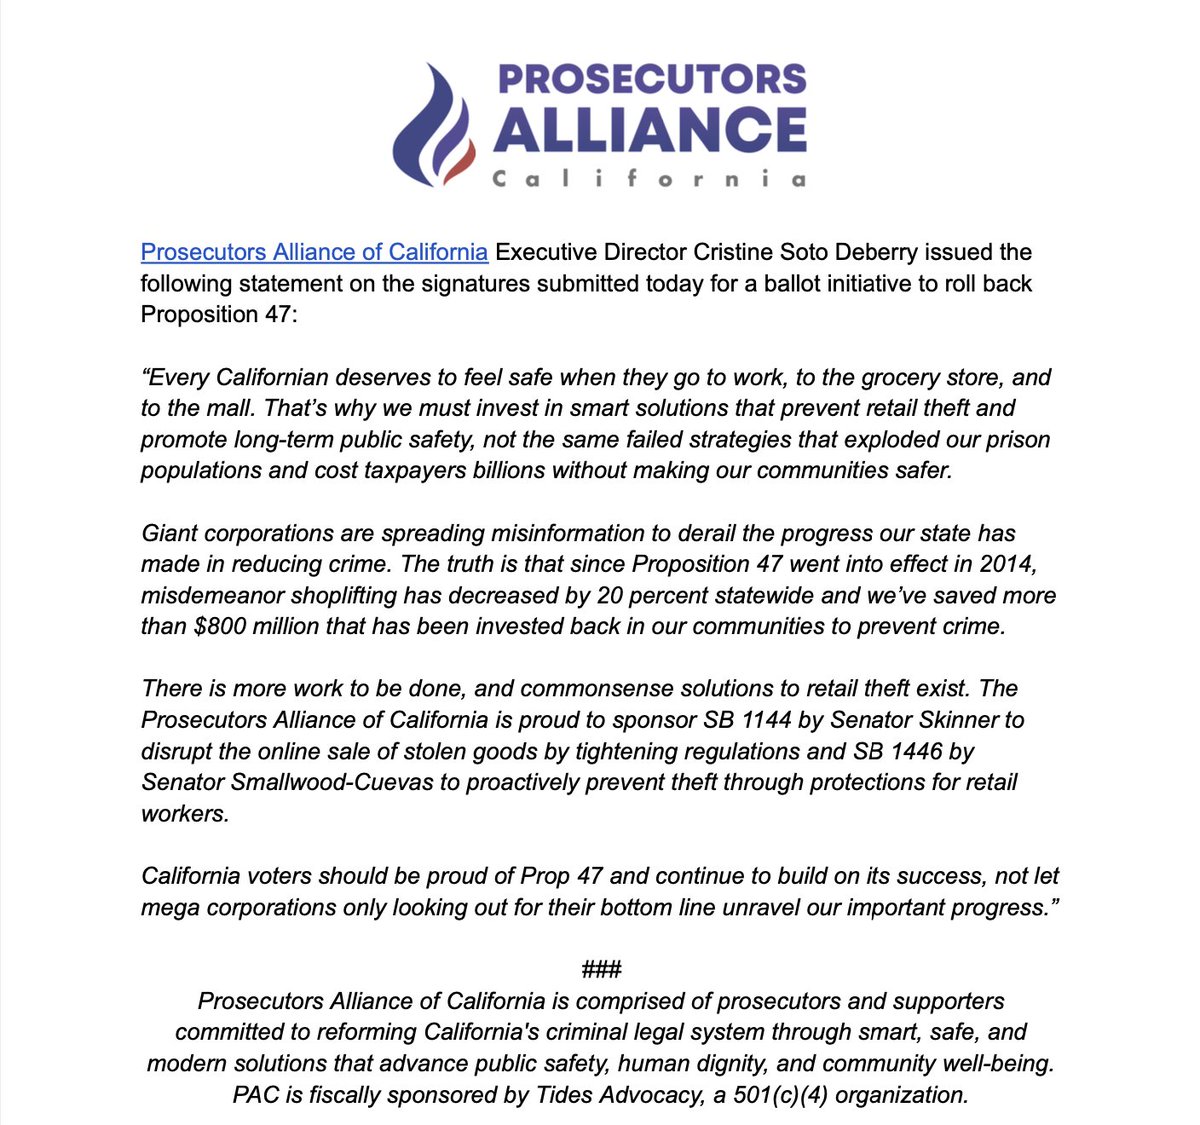 'California voters should be proud of Prop 47 and continue to build on its success, not let mega corporations only looking out for their bottom line unravel our important progress.' 

Read our full statement from @CristineDeBerry on the efforts to roll back #Prop47.